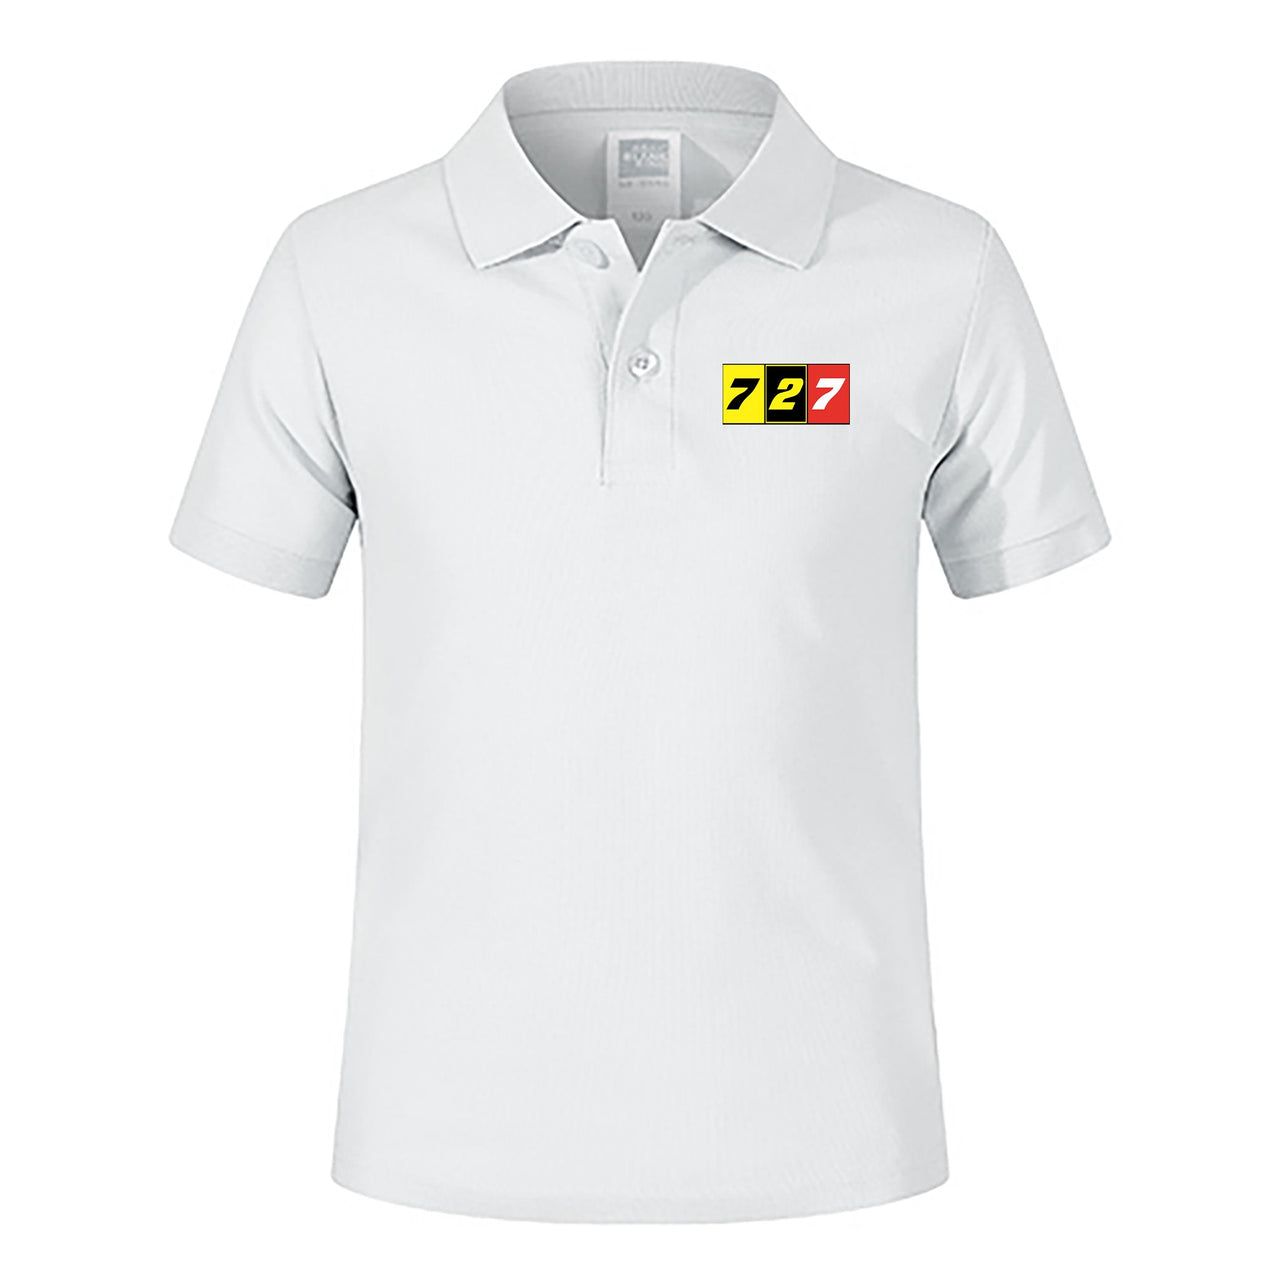 Flat Colourful 727 Designed Children Polo T-Shirts